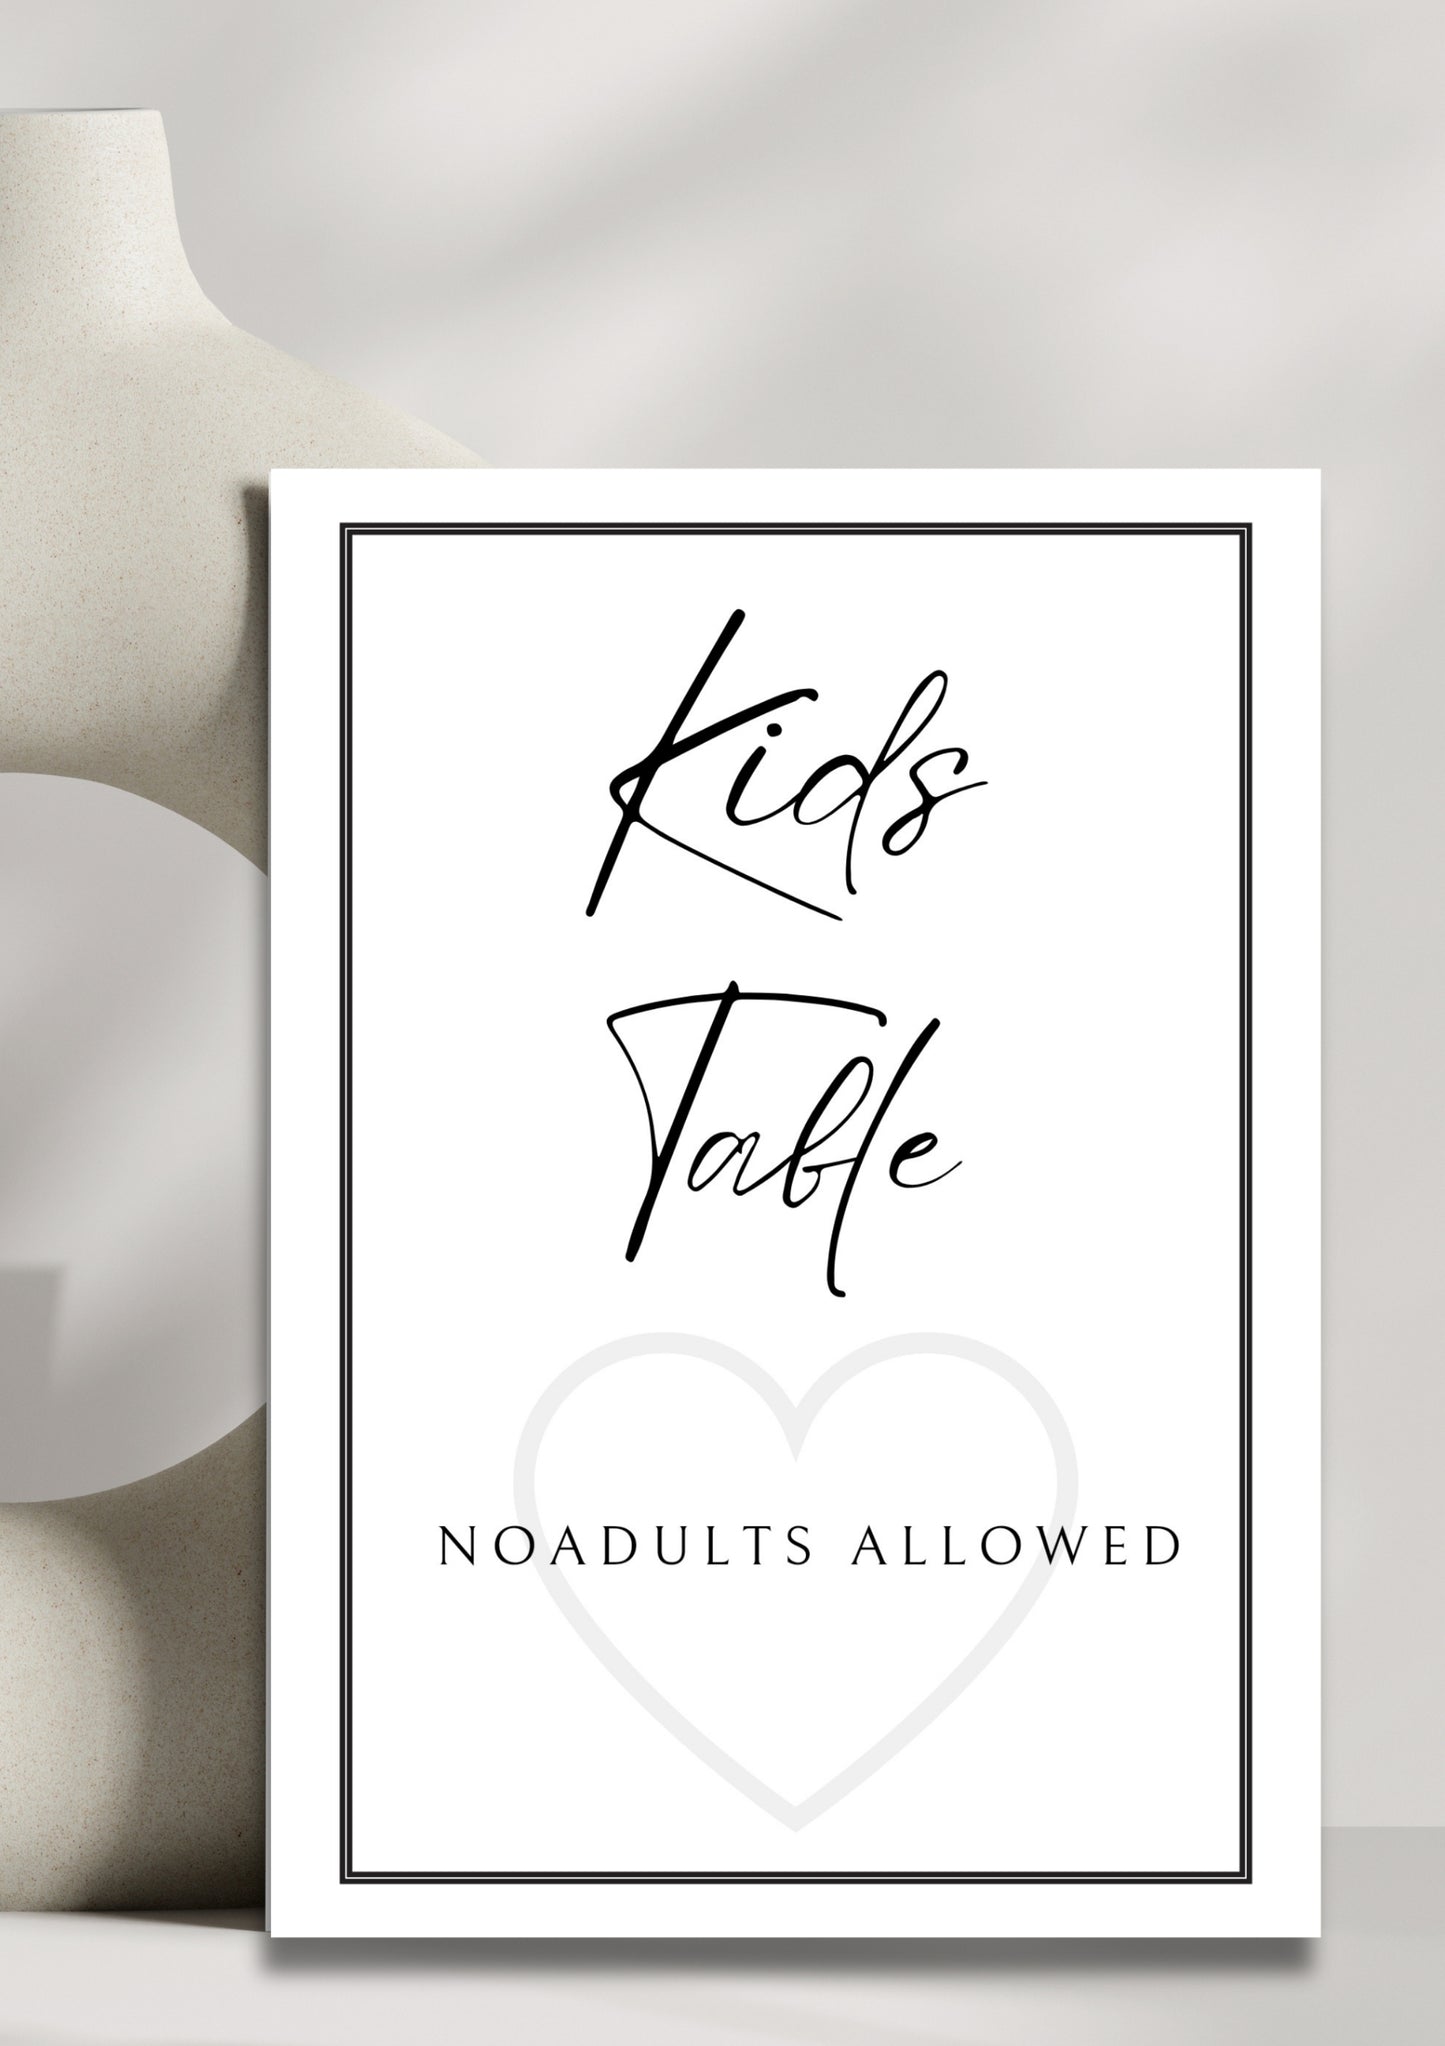 White stone collection - Kids table sign